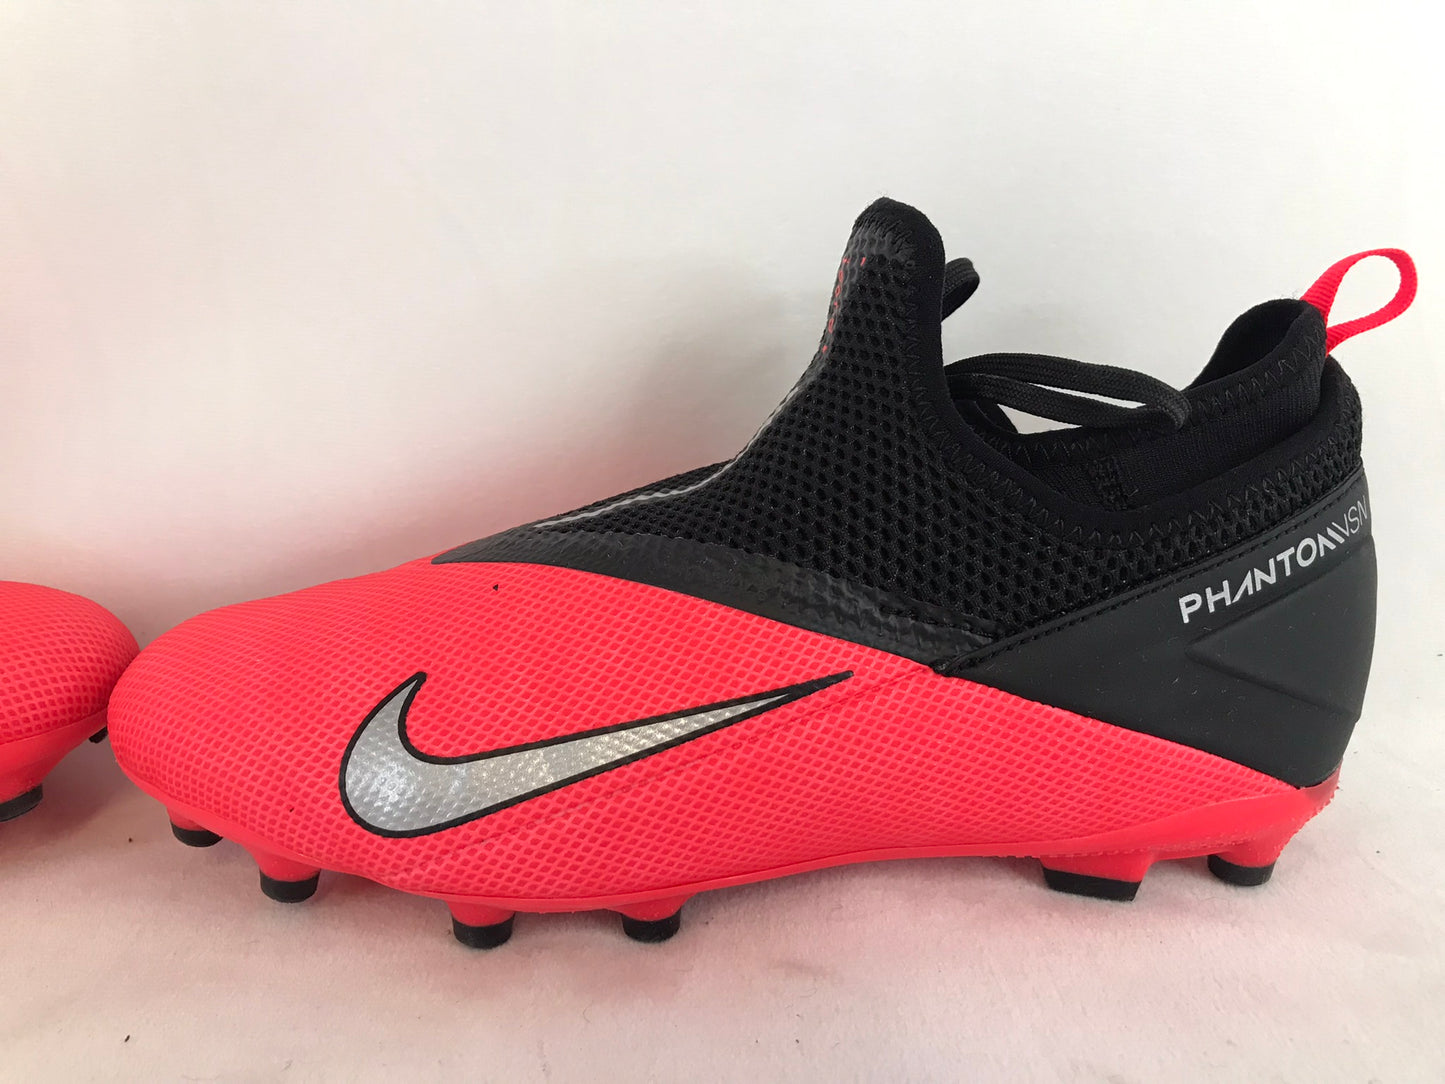 Soccer Shoes Cleats Men's Size 6 Nike Phantom Ghost  Elite With Slipper Foot Red Black Outstanding Quality Retail $279.99